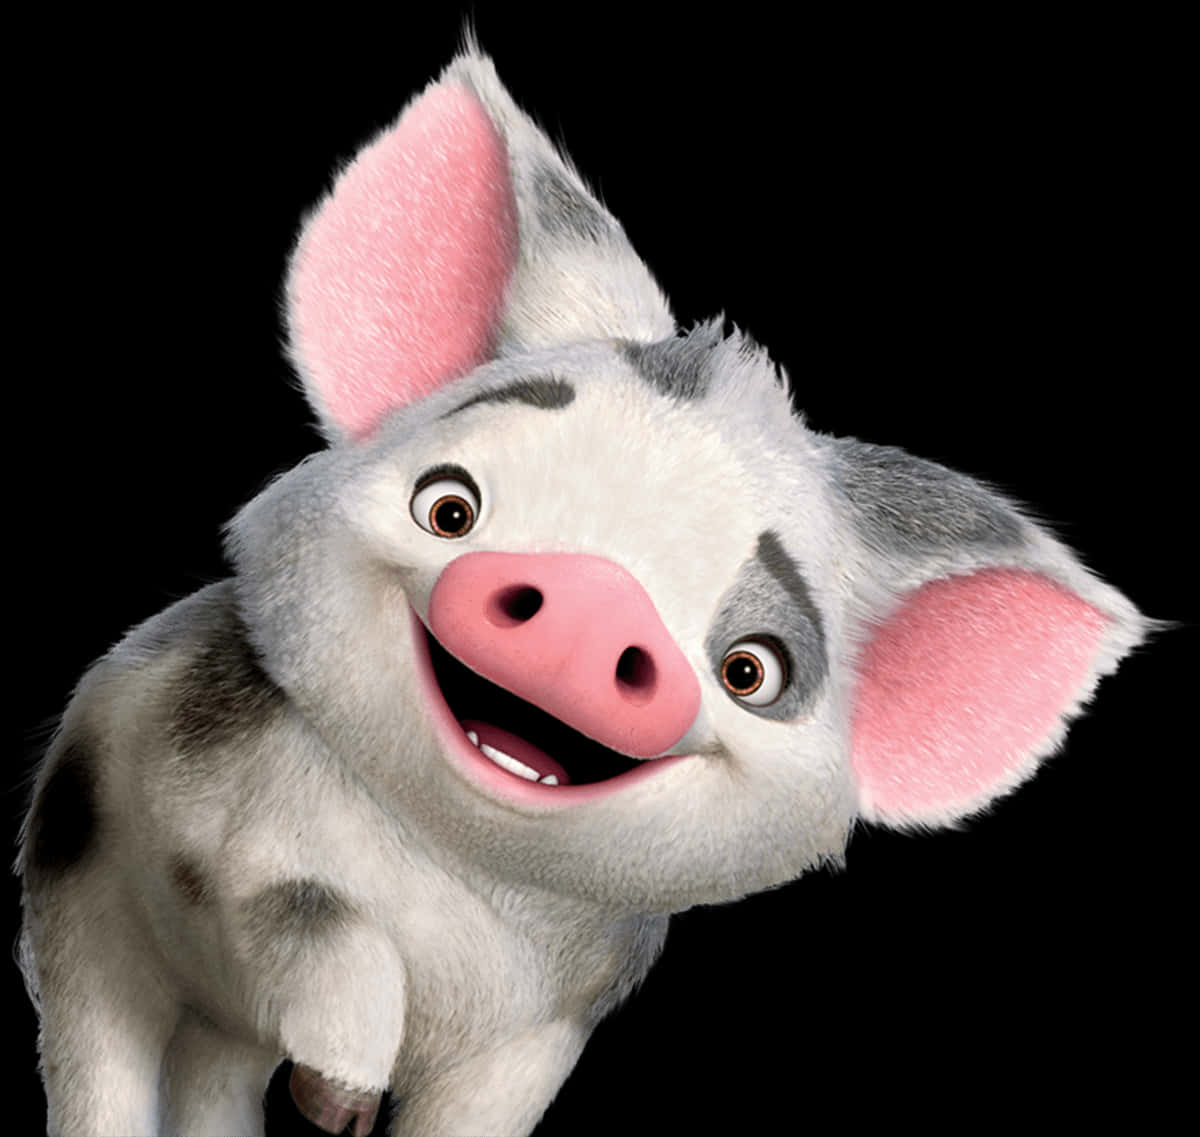 A Cartoon Pig With A Black Background PNG